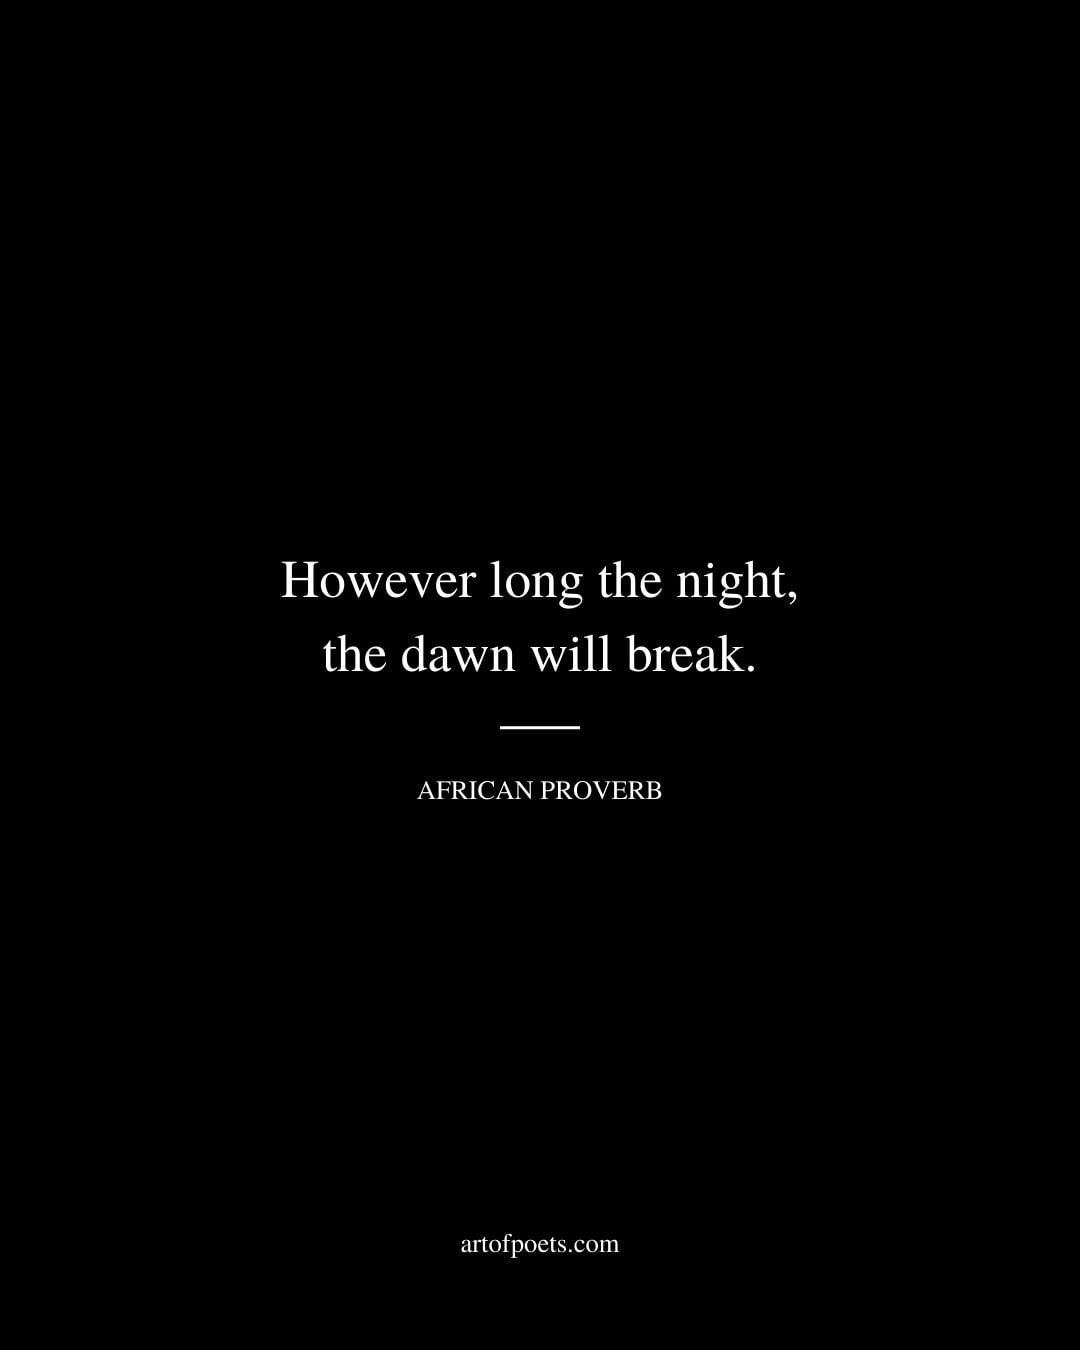 However long the night the dawn will break. African proverb